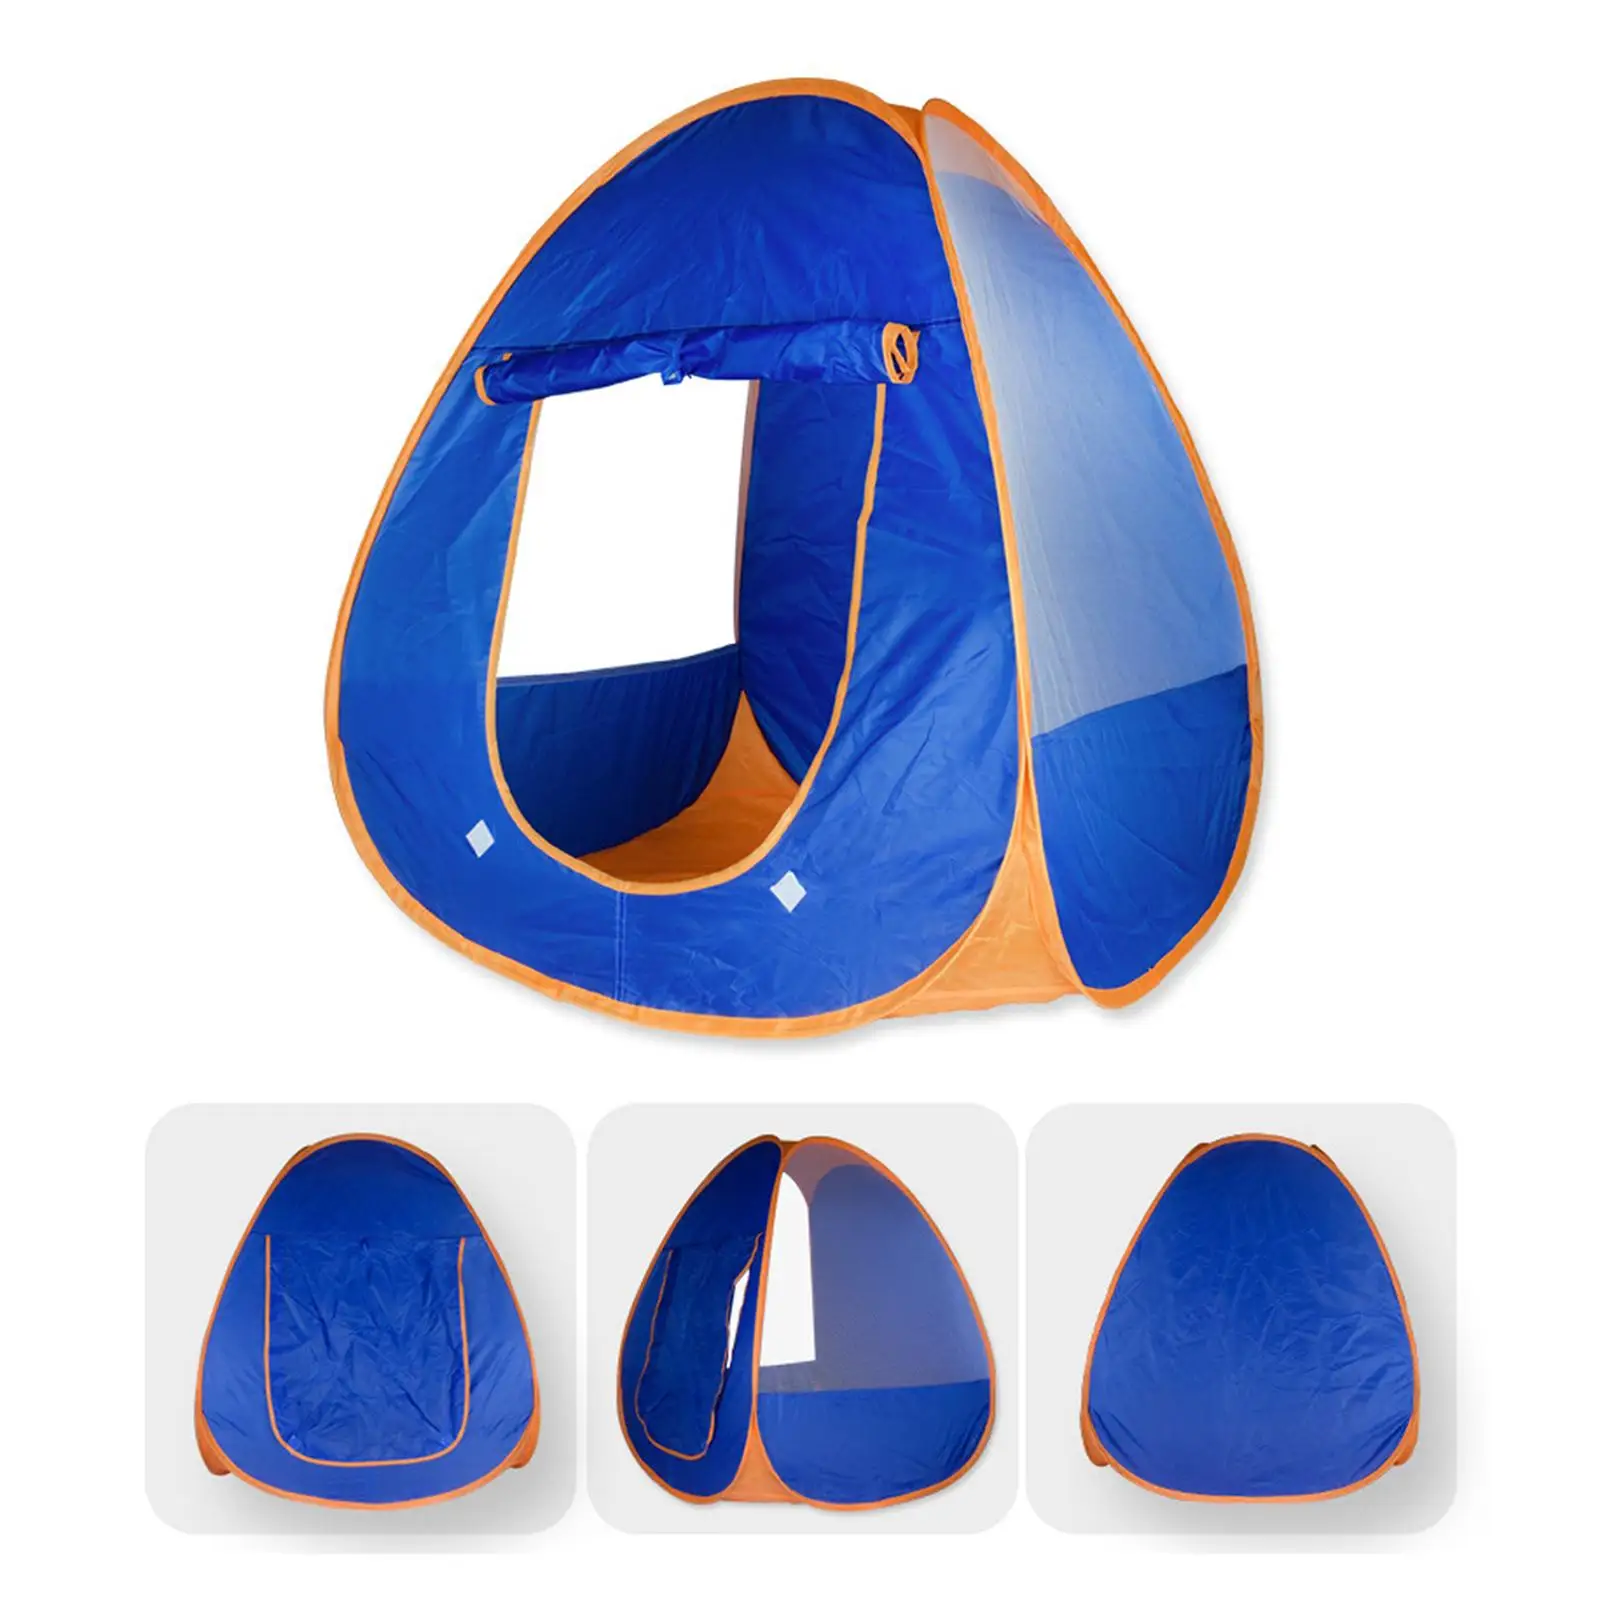 Children Play Tent Collapsible Portable Pretend Play Birthday Gifts Child Room Decor for Party Indoor Outdoor Camping Beach Home